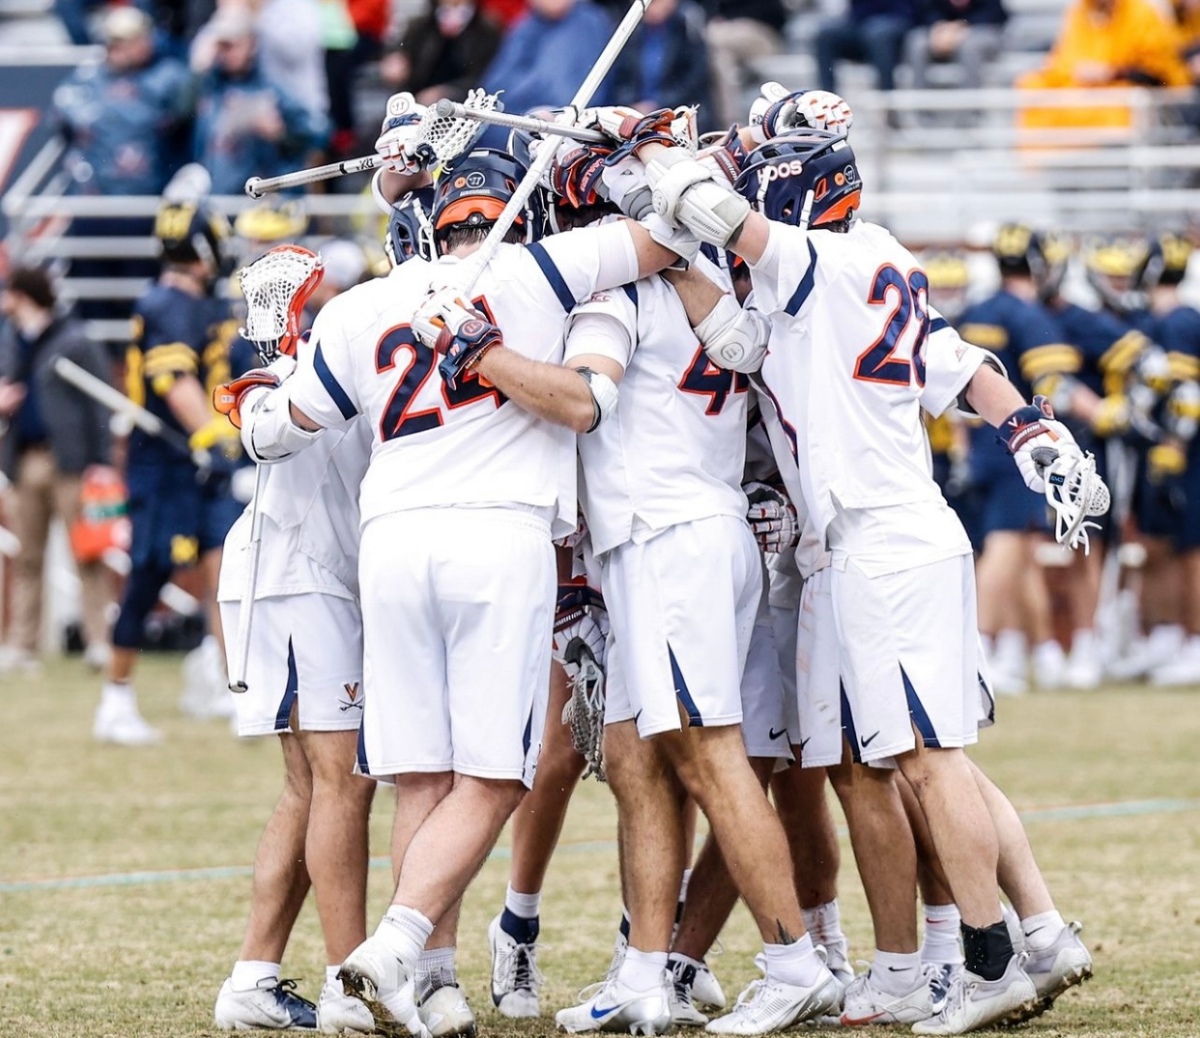 College Lacrosse Roundup: Virginia, Penn State, Maryland, Army, Boston U. Shine in Recent Games